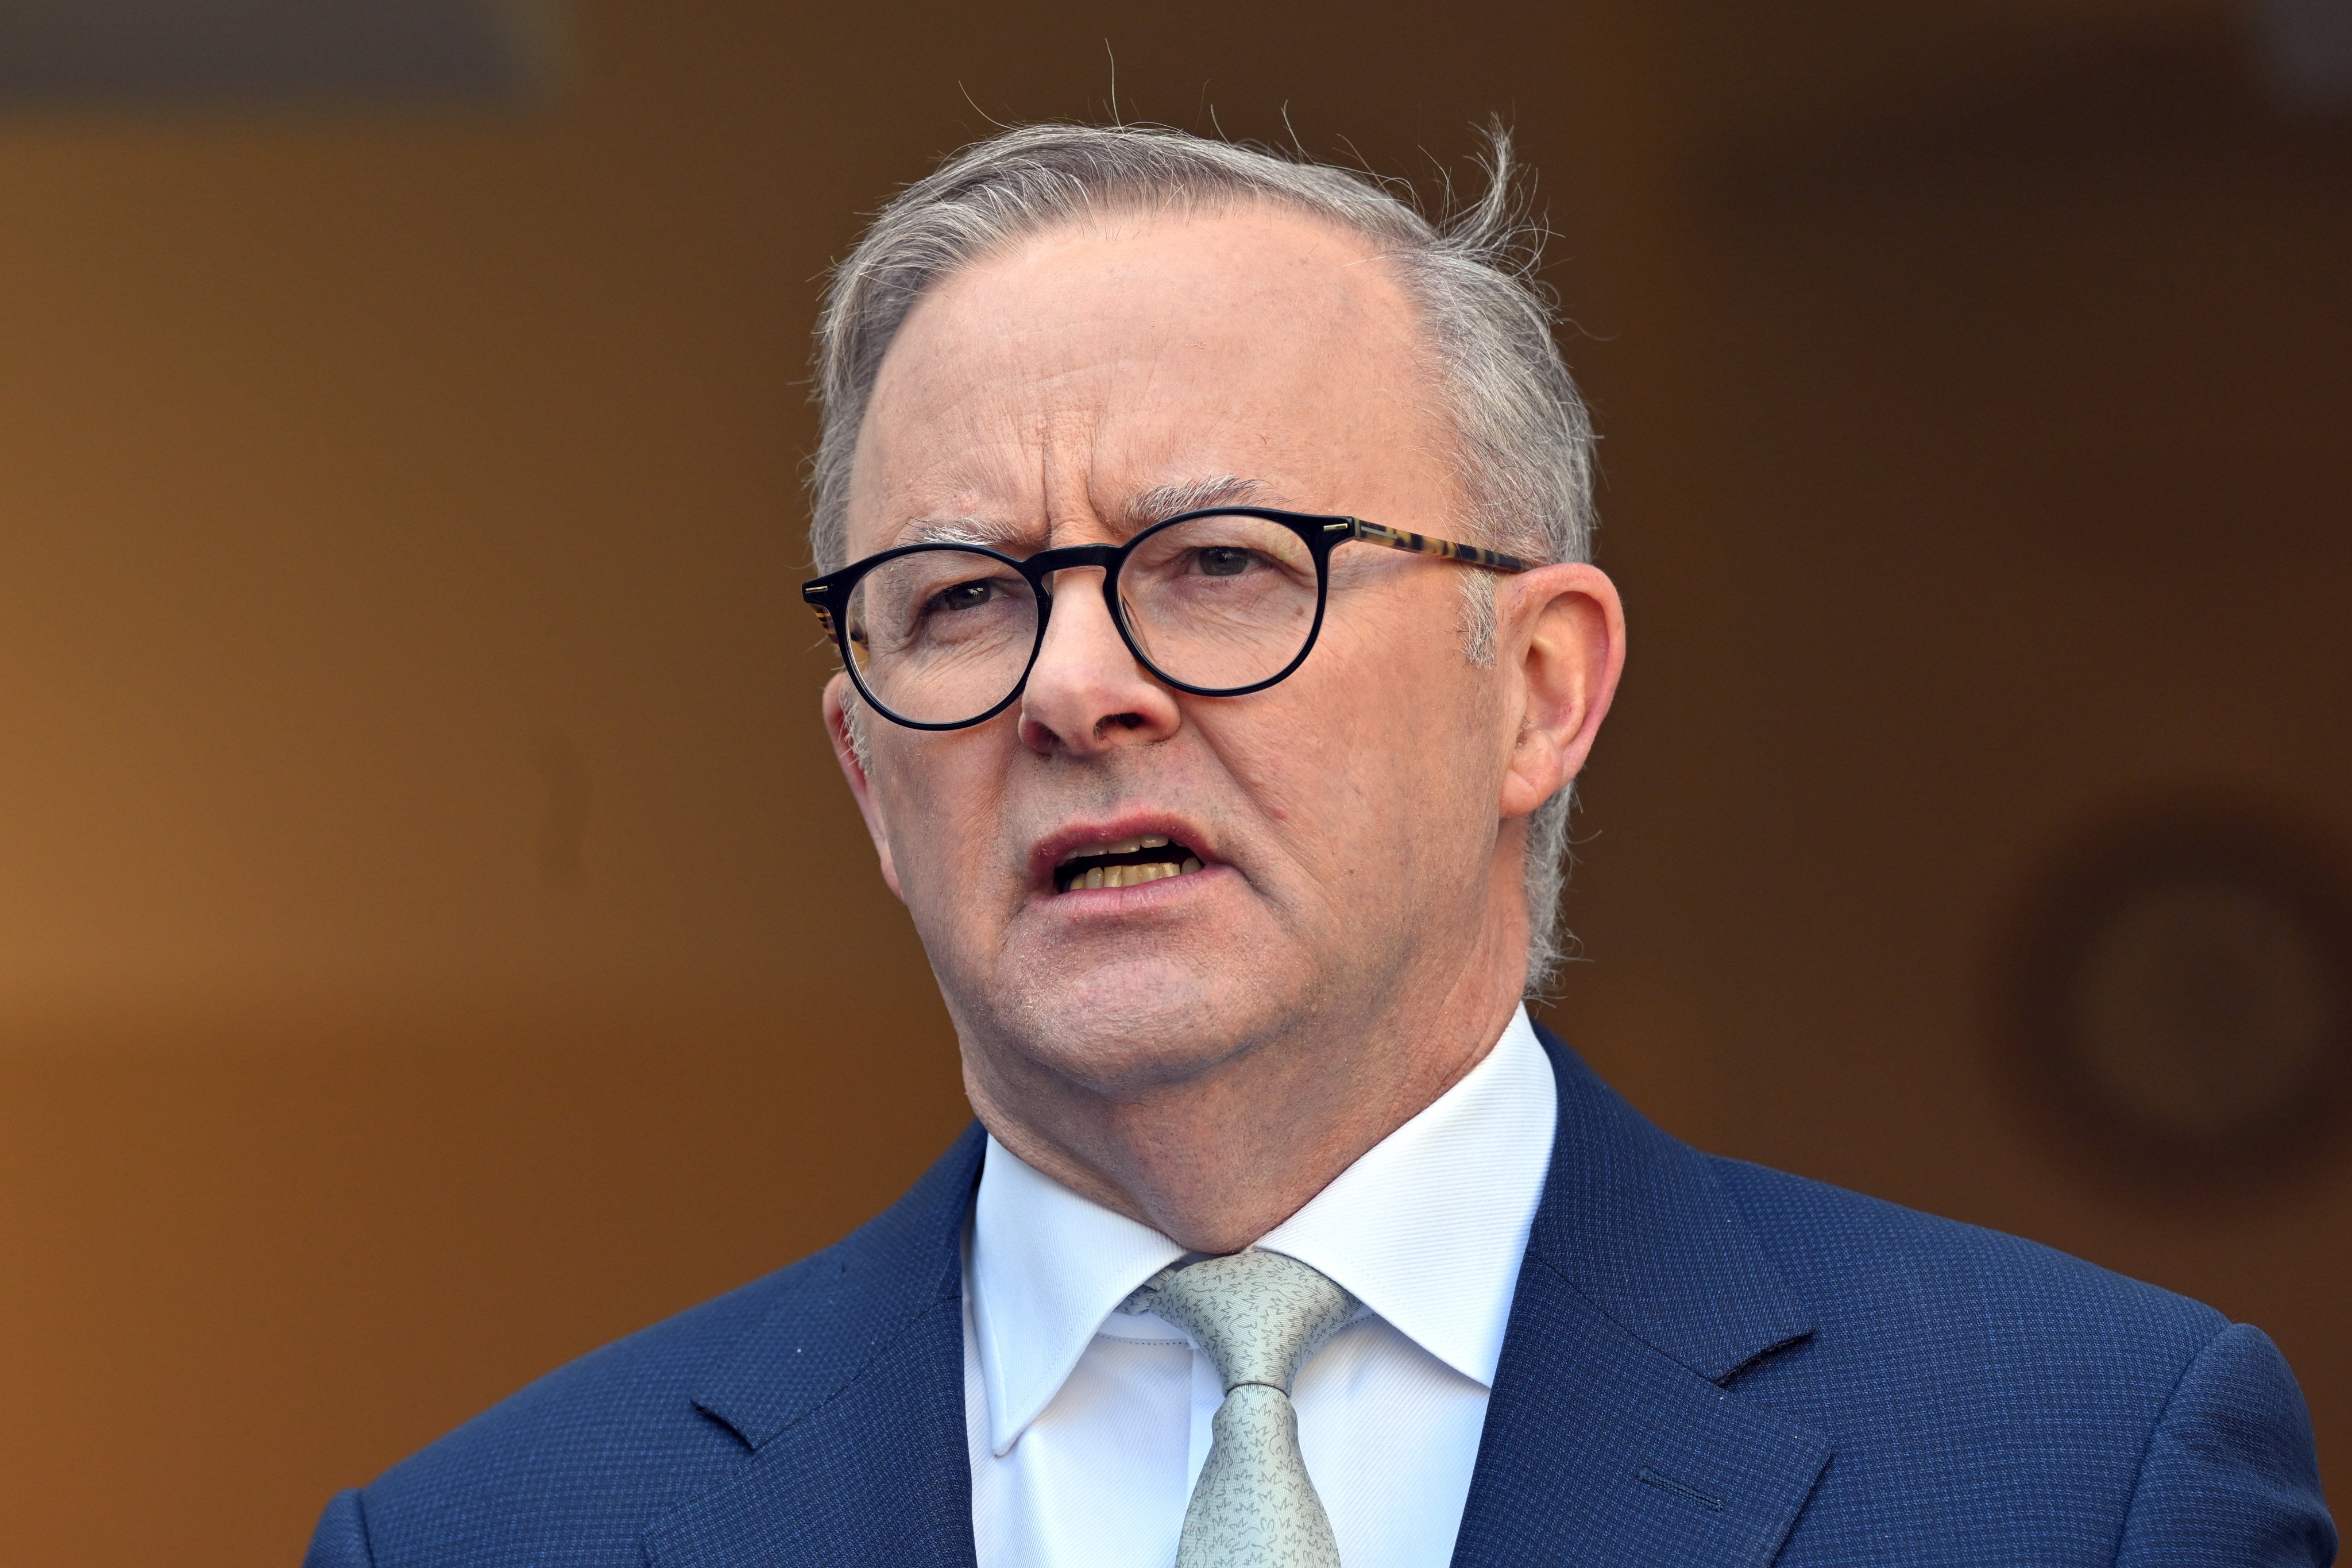 Australian Prime Minister Anthony Albanese called the offer of a bounty for the suspects “unacceptable”, adding that Australia and China “do disagree over human rights issues”. Photo: AAP/dpa